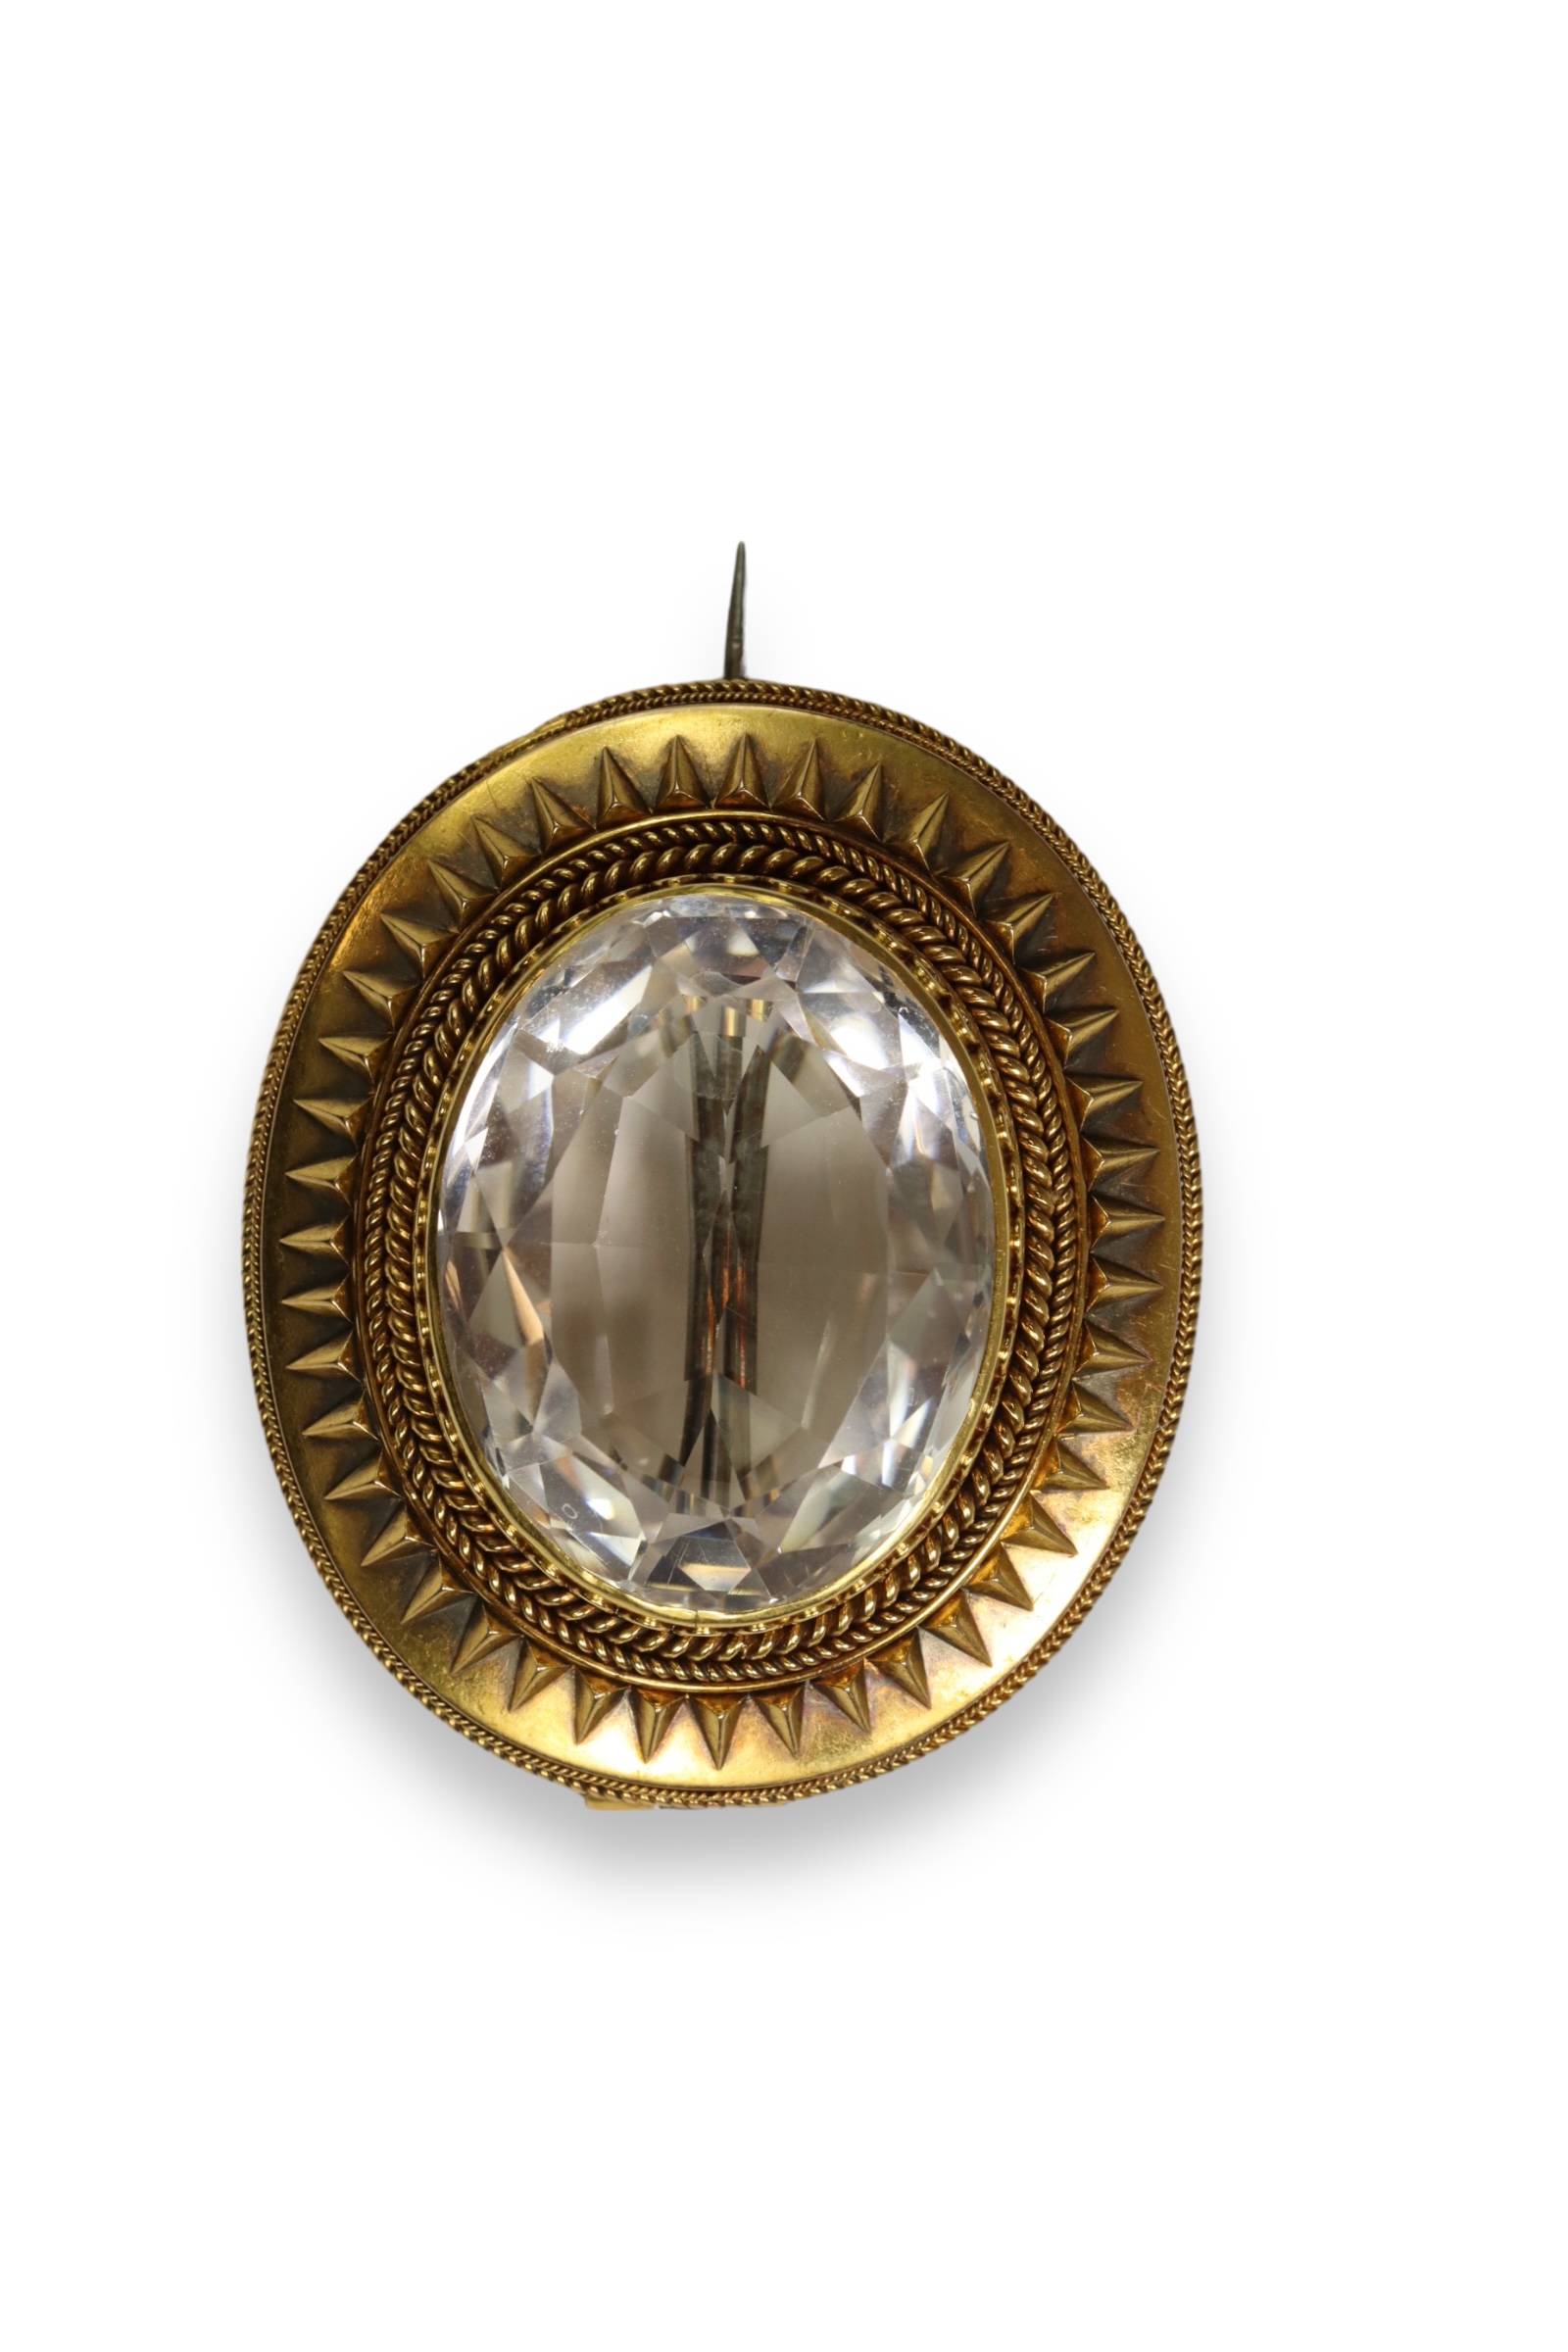 A Victorian 15/18 ct Yellow Gold and Rock Crystal Brooch, circa 1870 The large oval mixed-cut